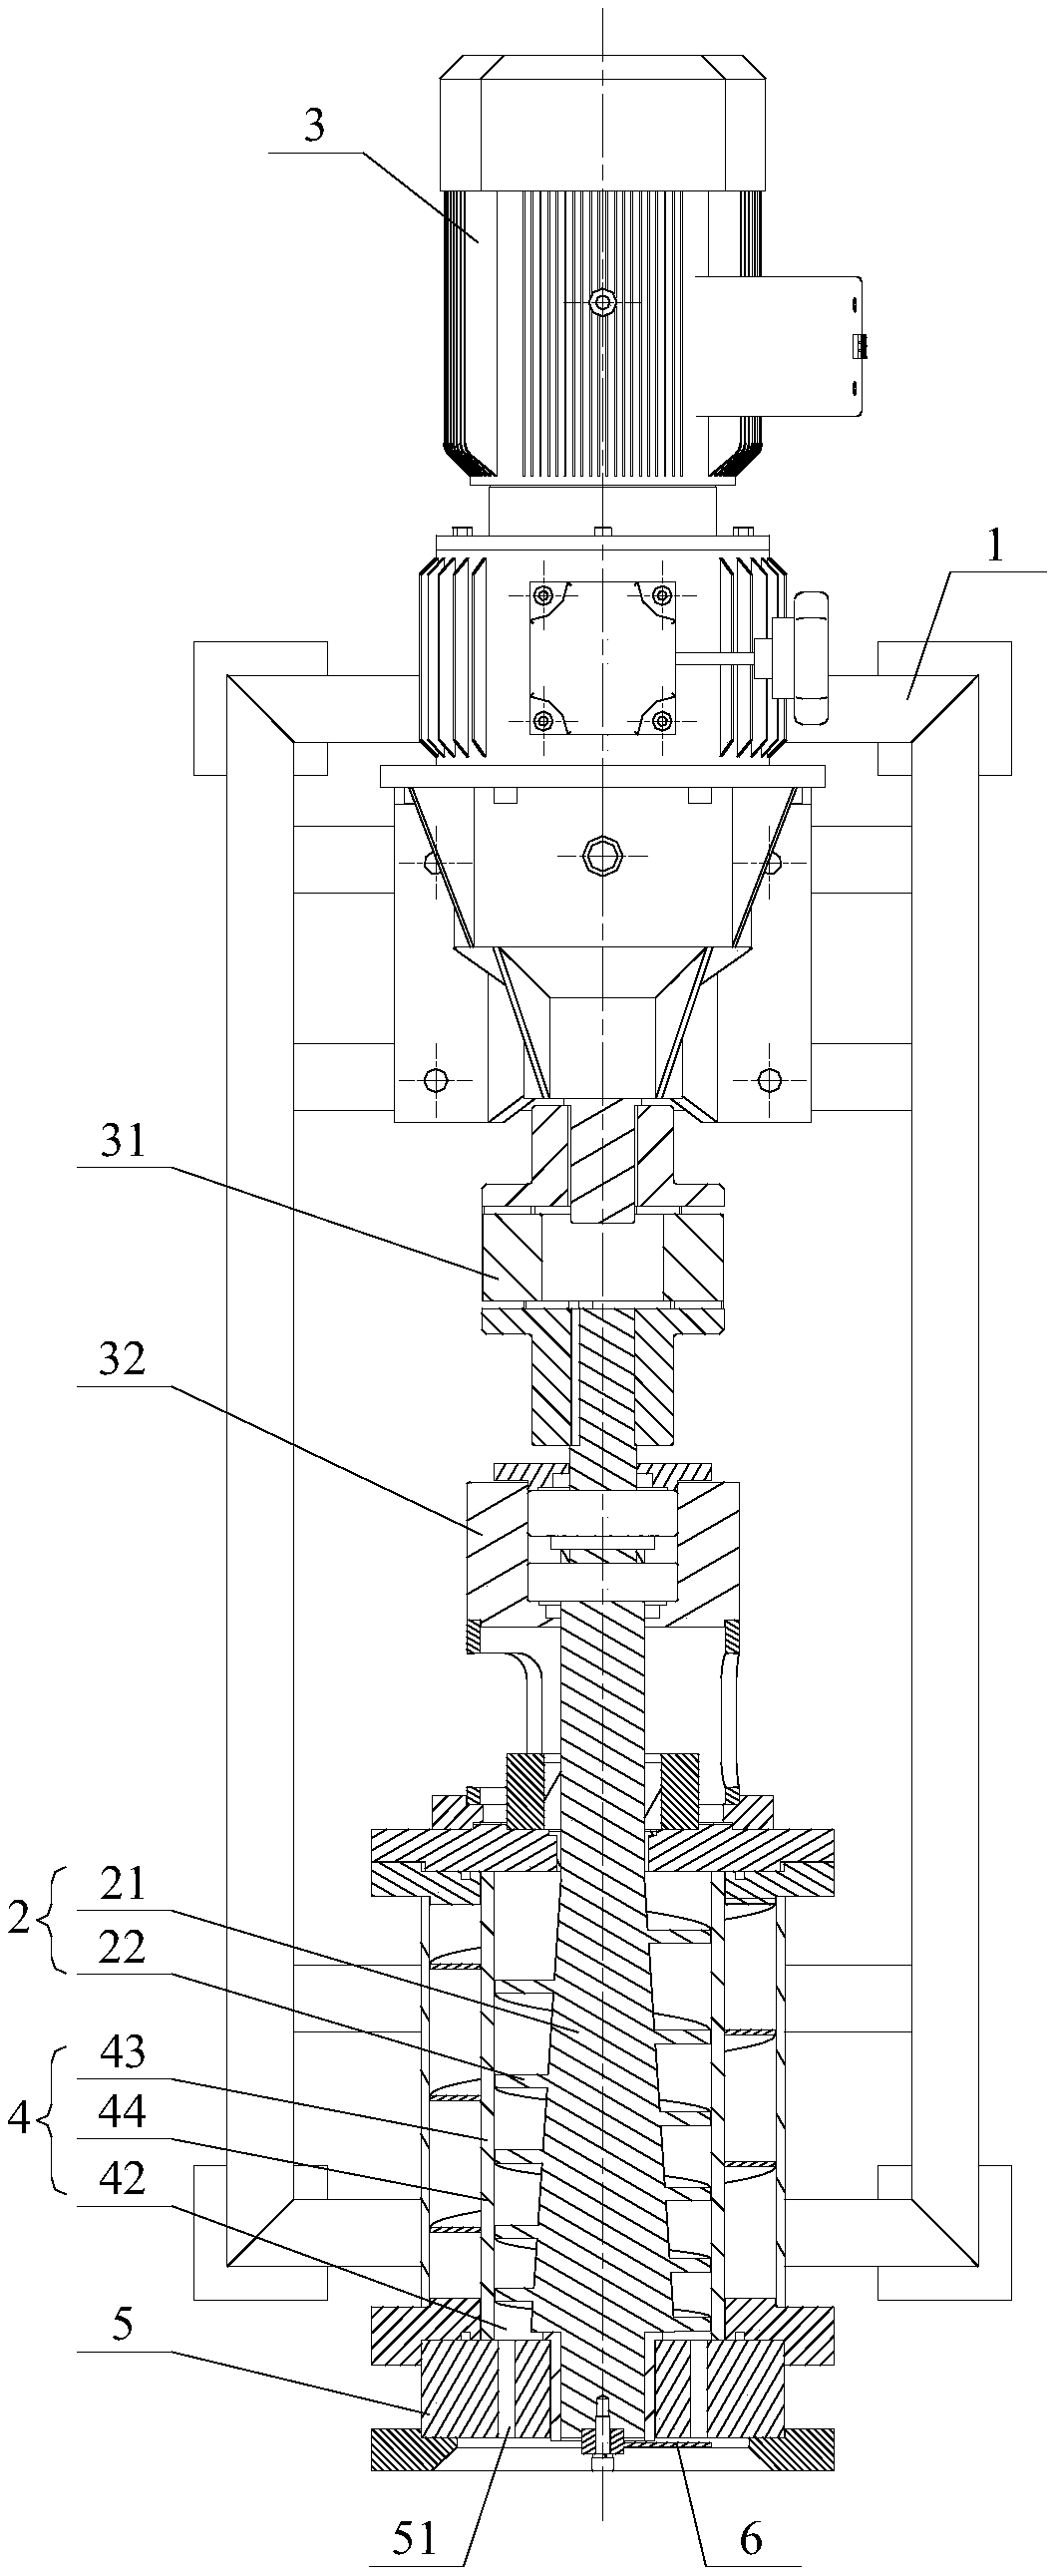 An activated carbon particle preparing device